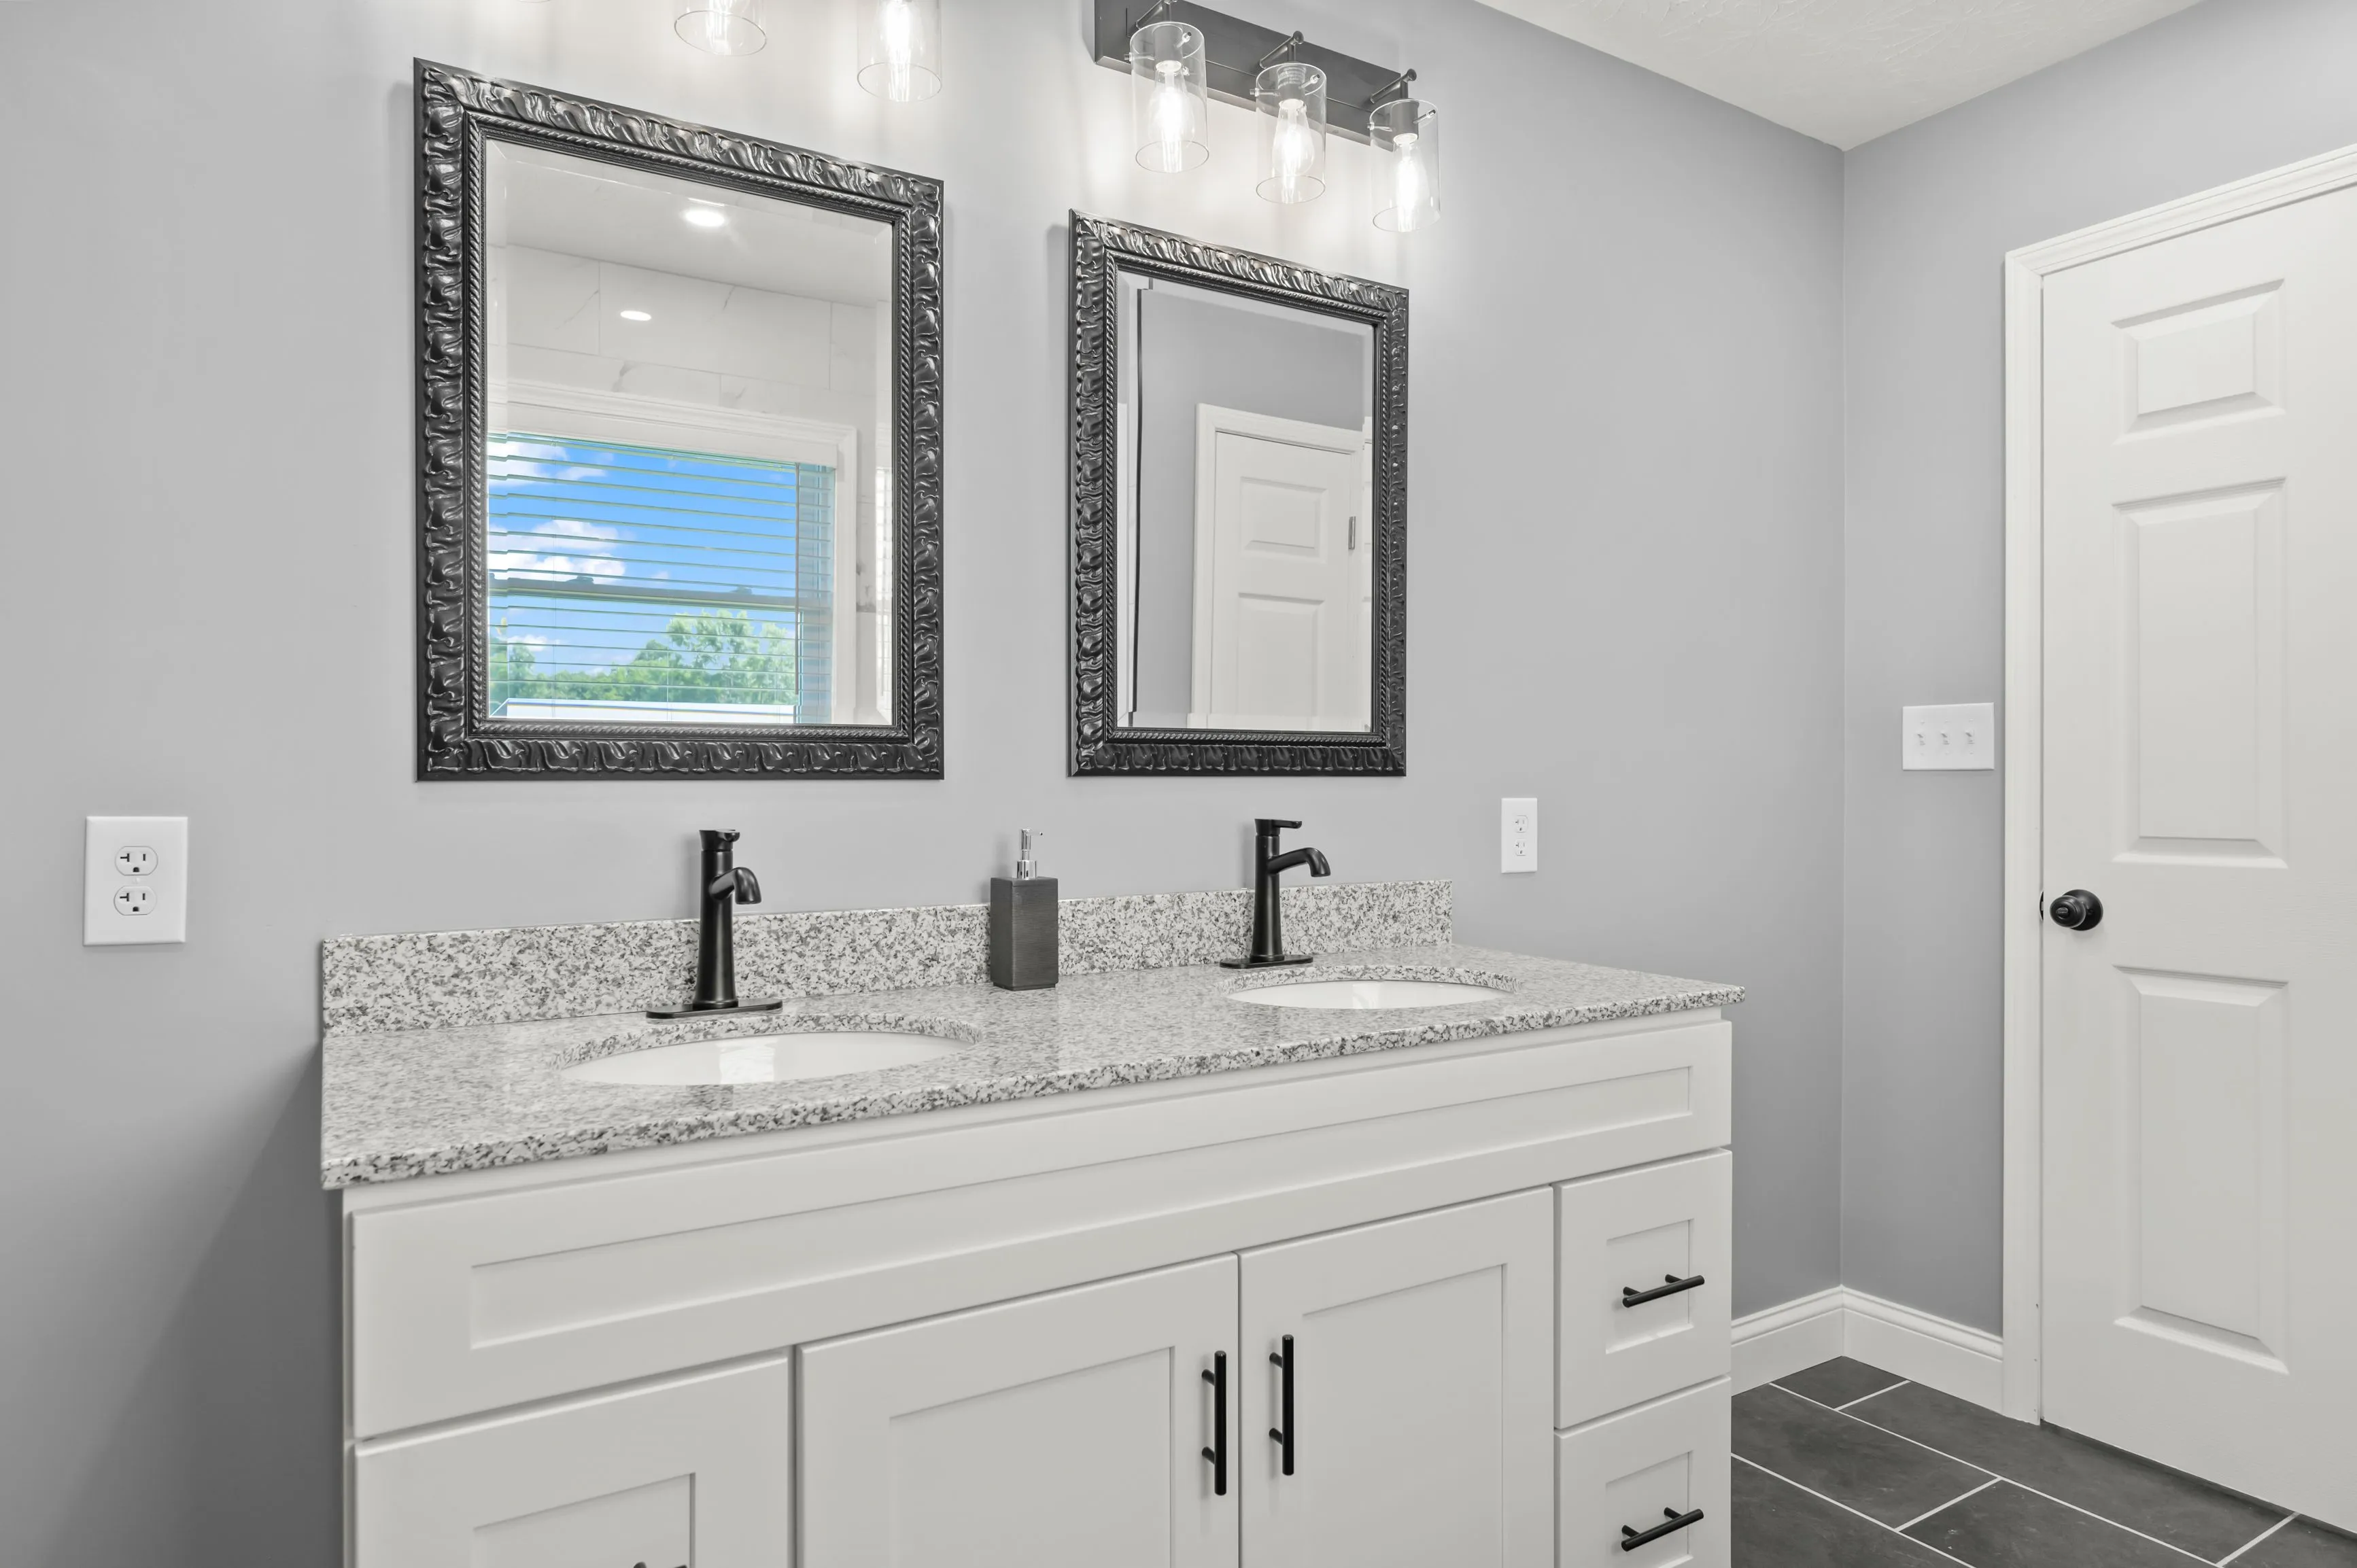 Modern bathroom interior with double sink vanity, large mirrors, and gray walls.